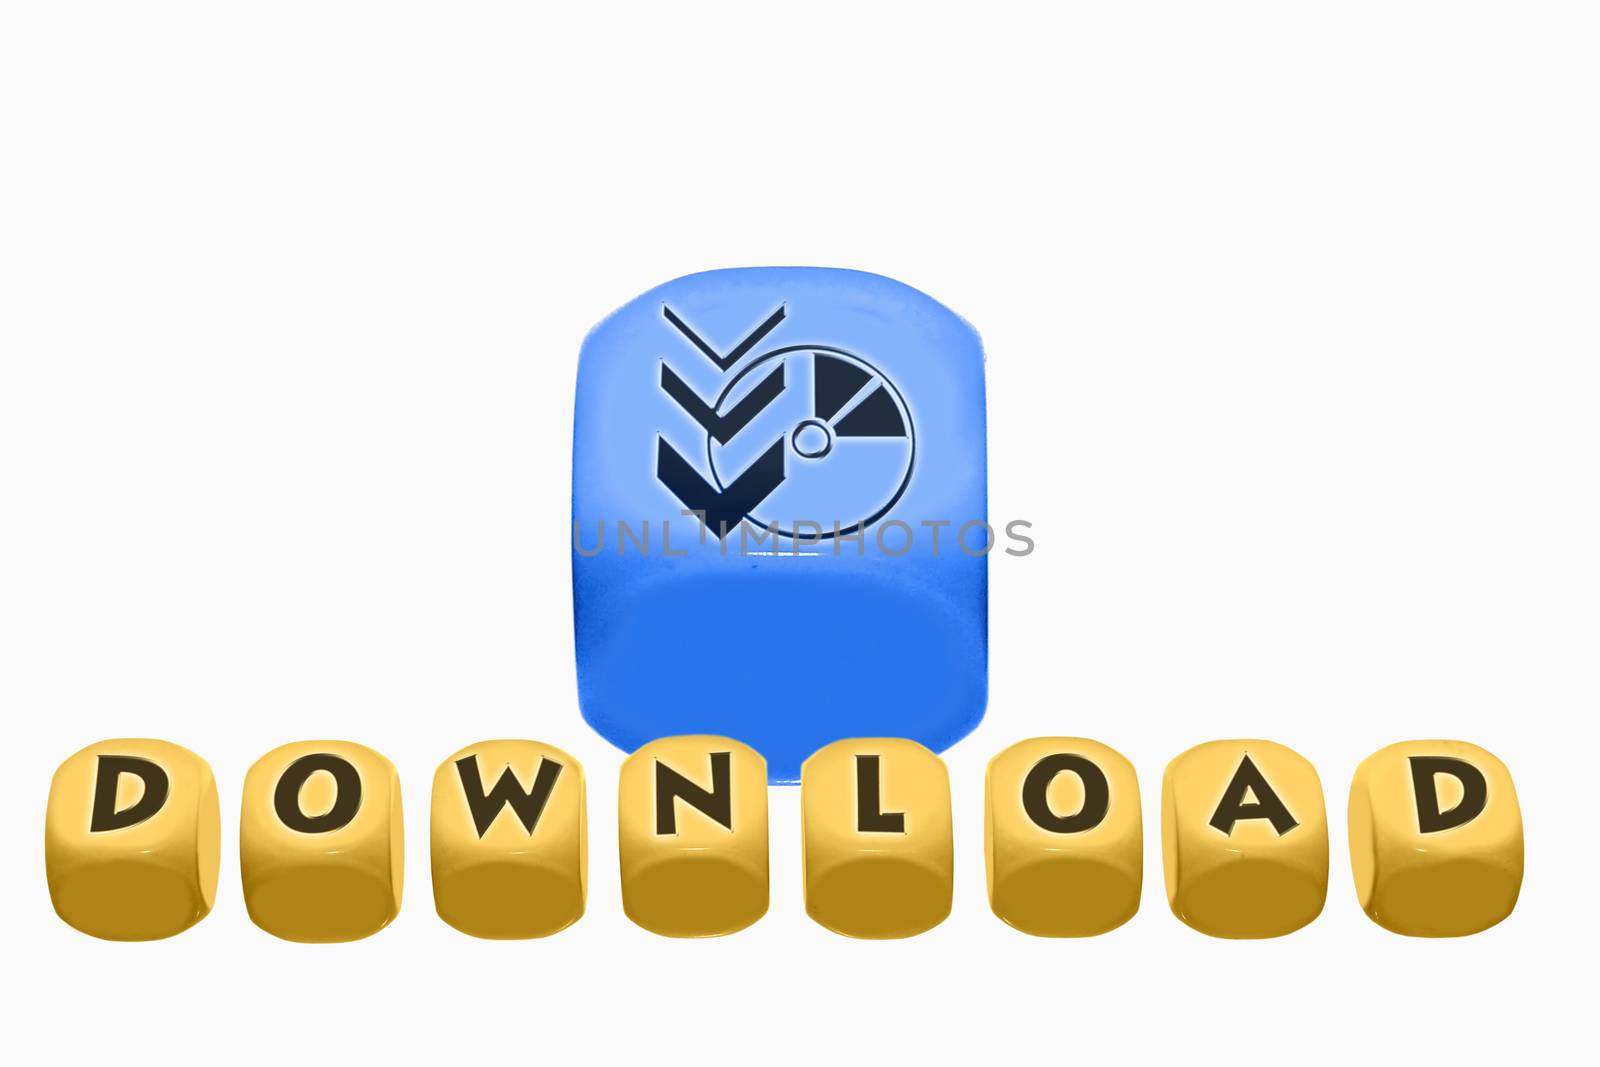 word download on cubes